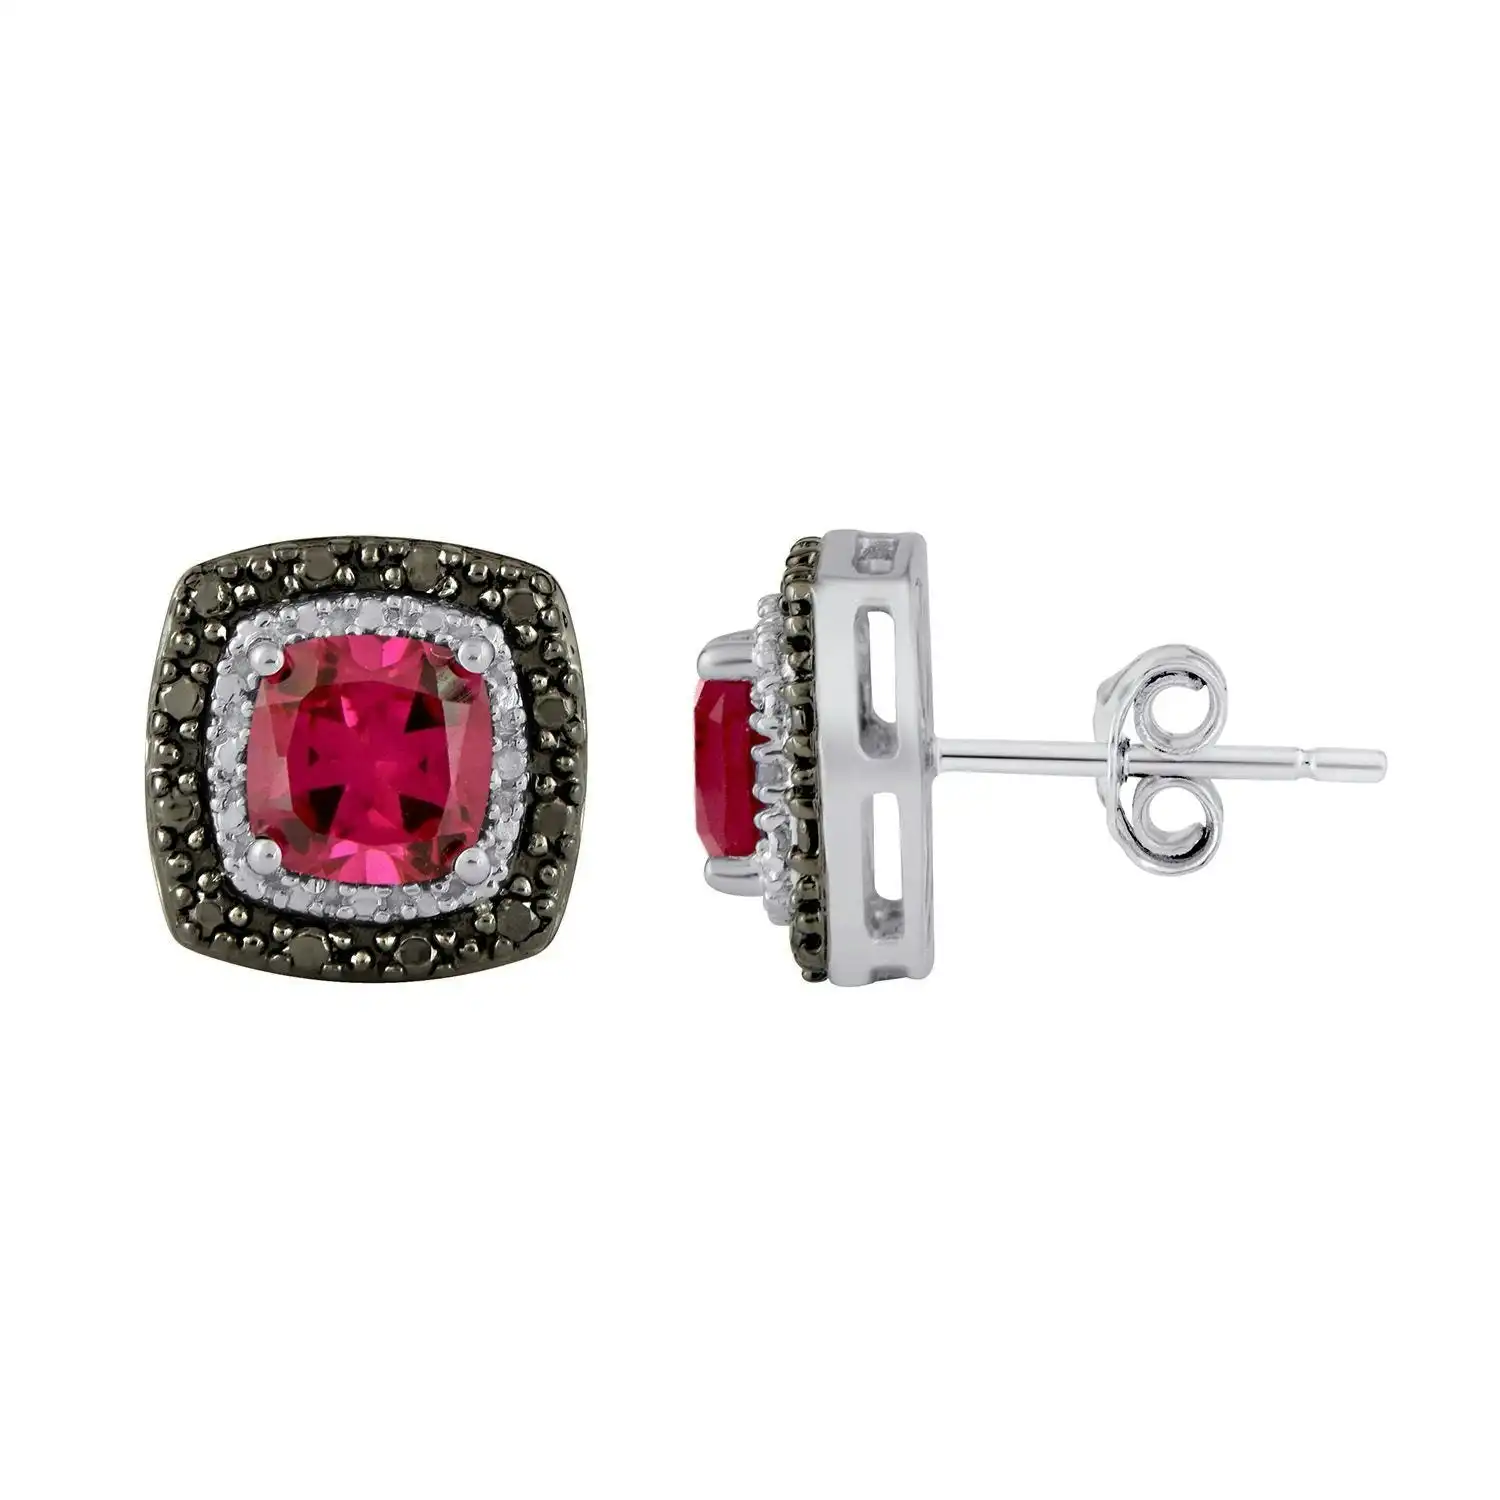 Mirage Created Ruby and Black Diamond Set Stud Earrings in Sterling Silver